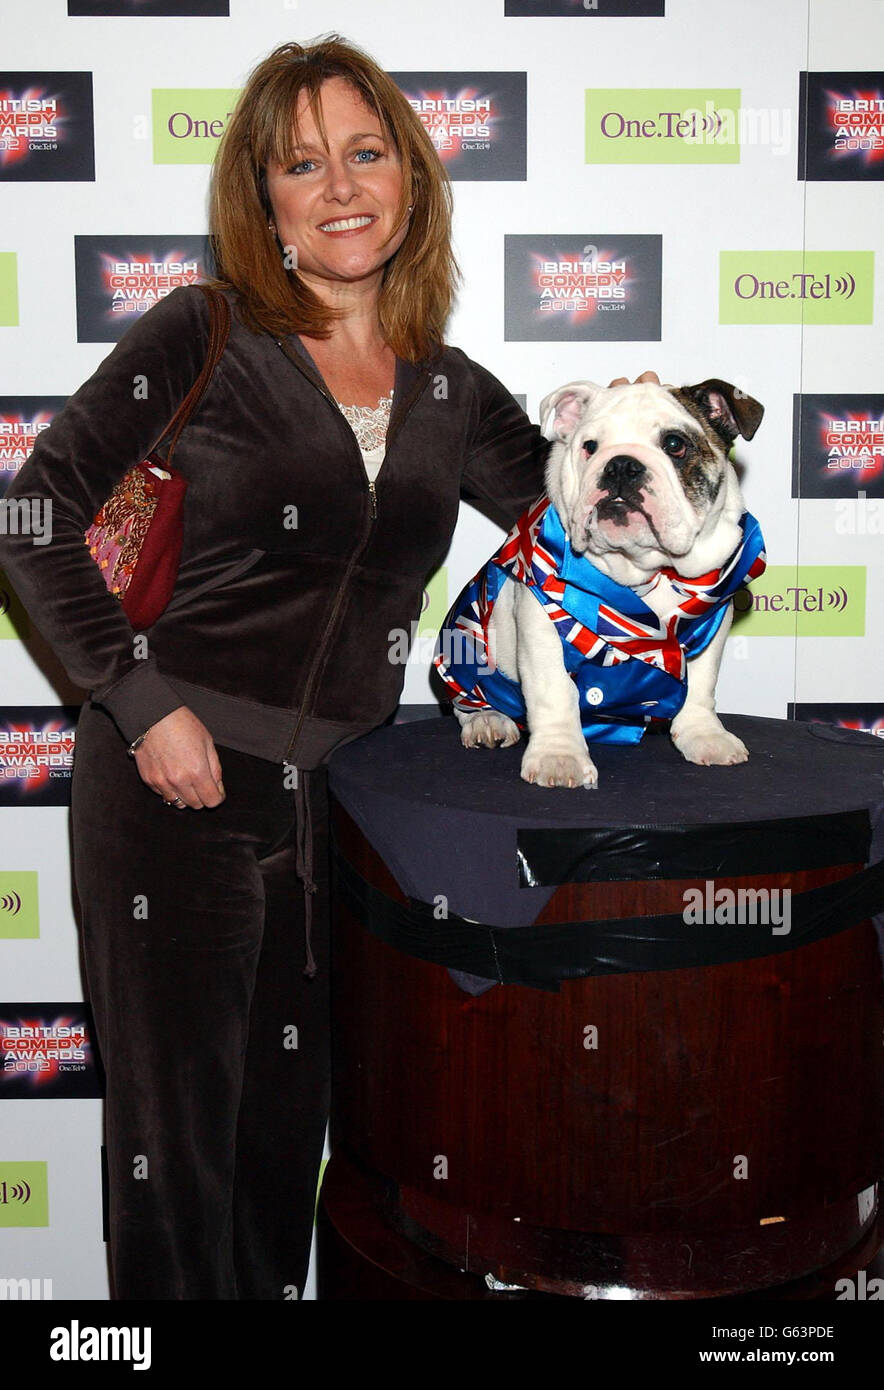 Impressionist Jan Ravens with a pedigree British bulldog Albert, at the launch party for The British Comedy Awards, at Sway in Covent Garden. Stock Photo